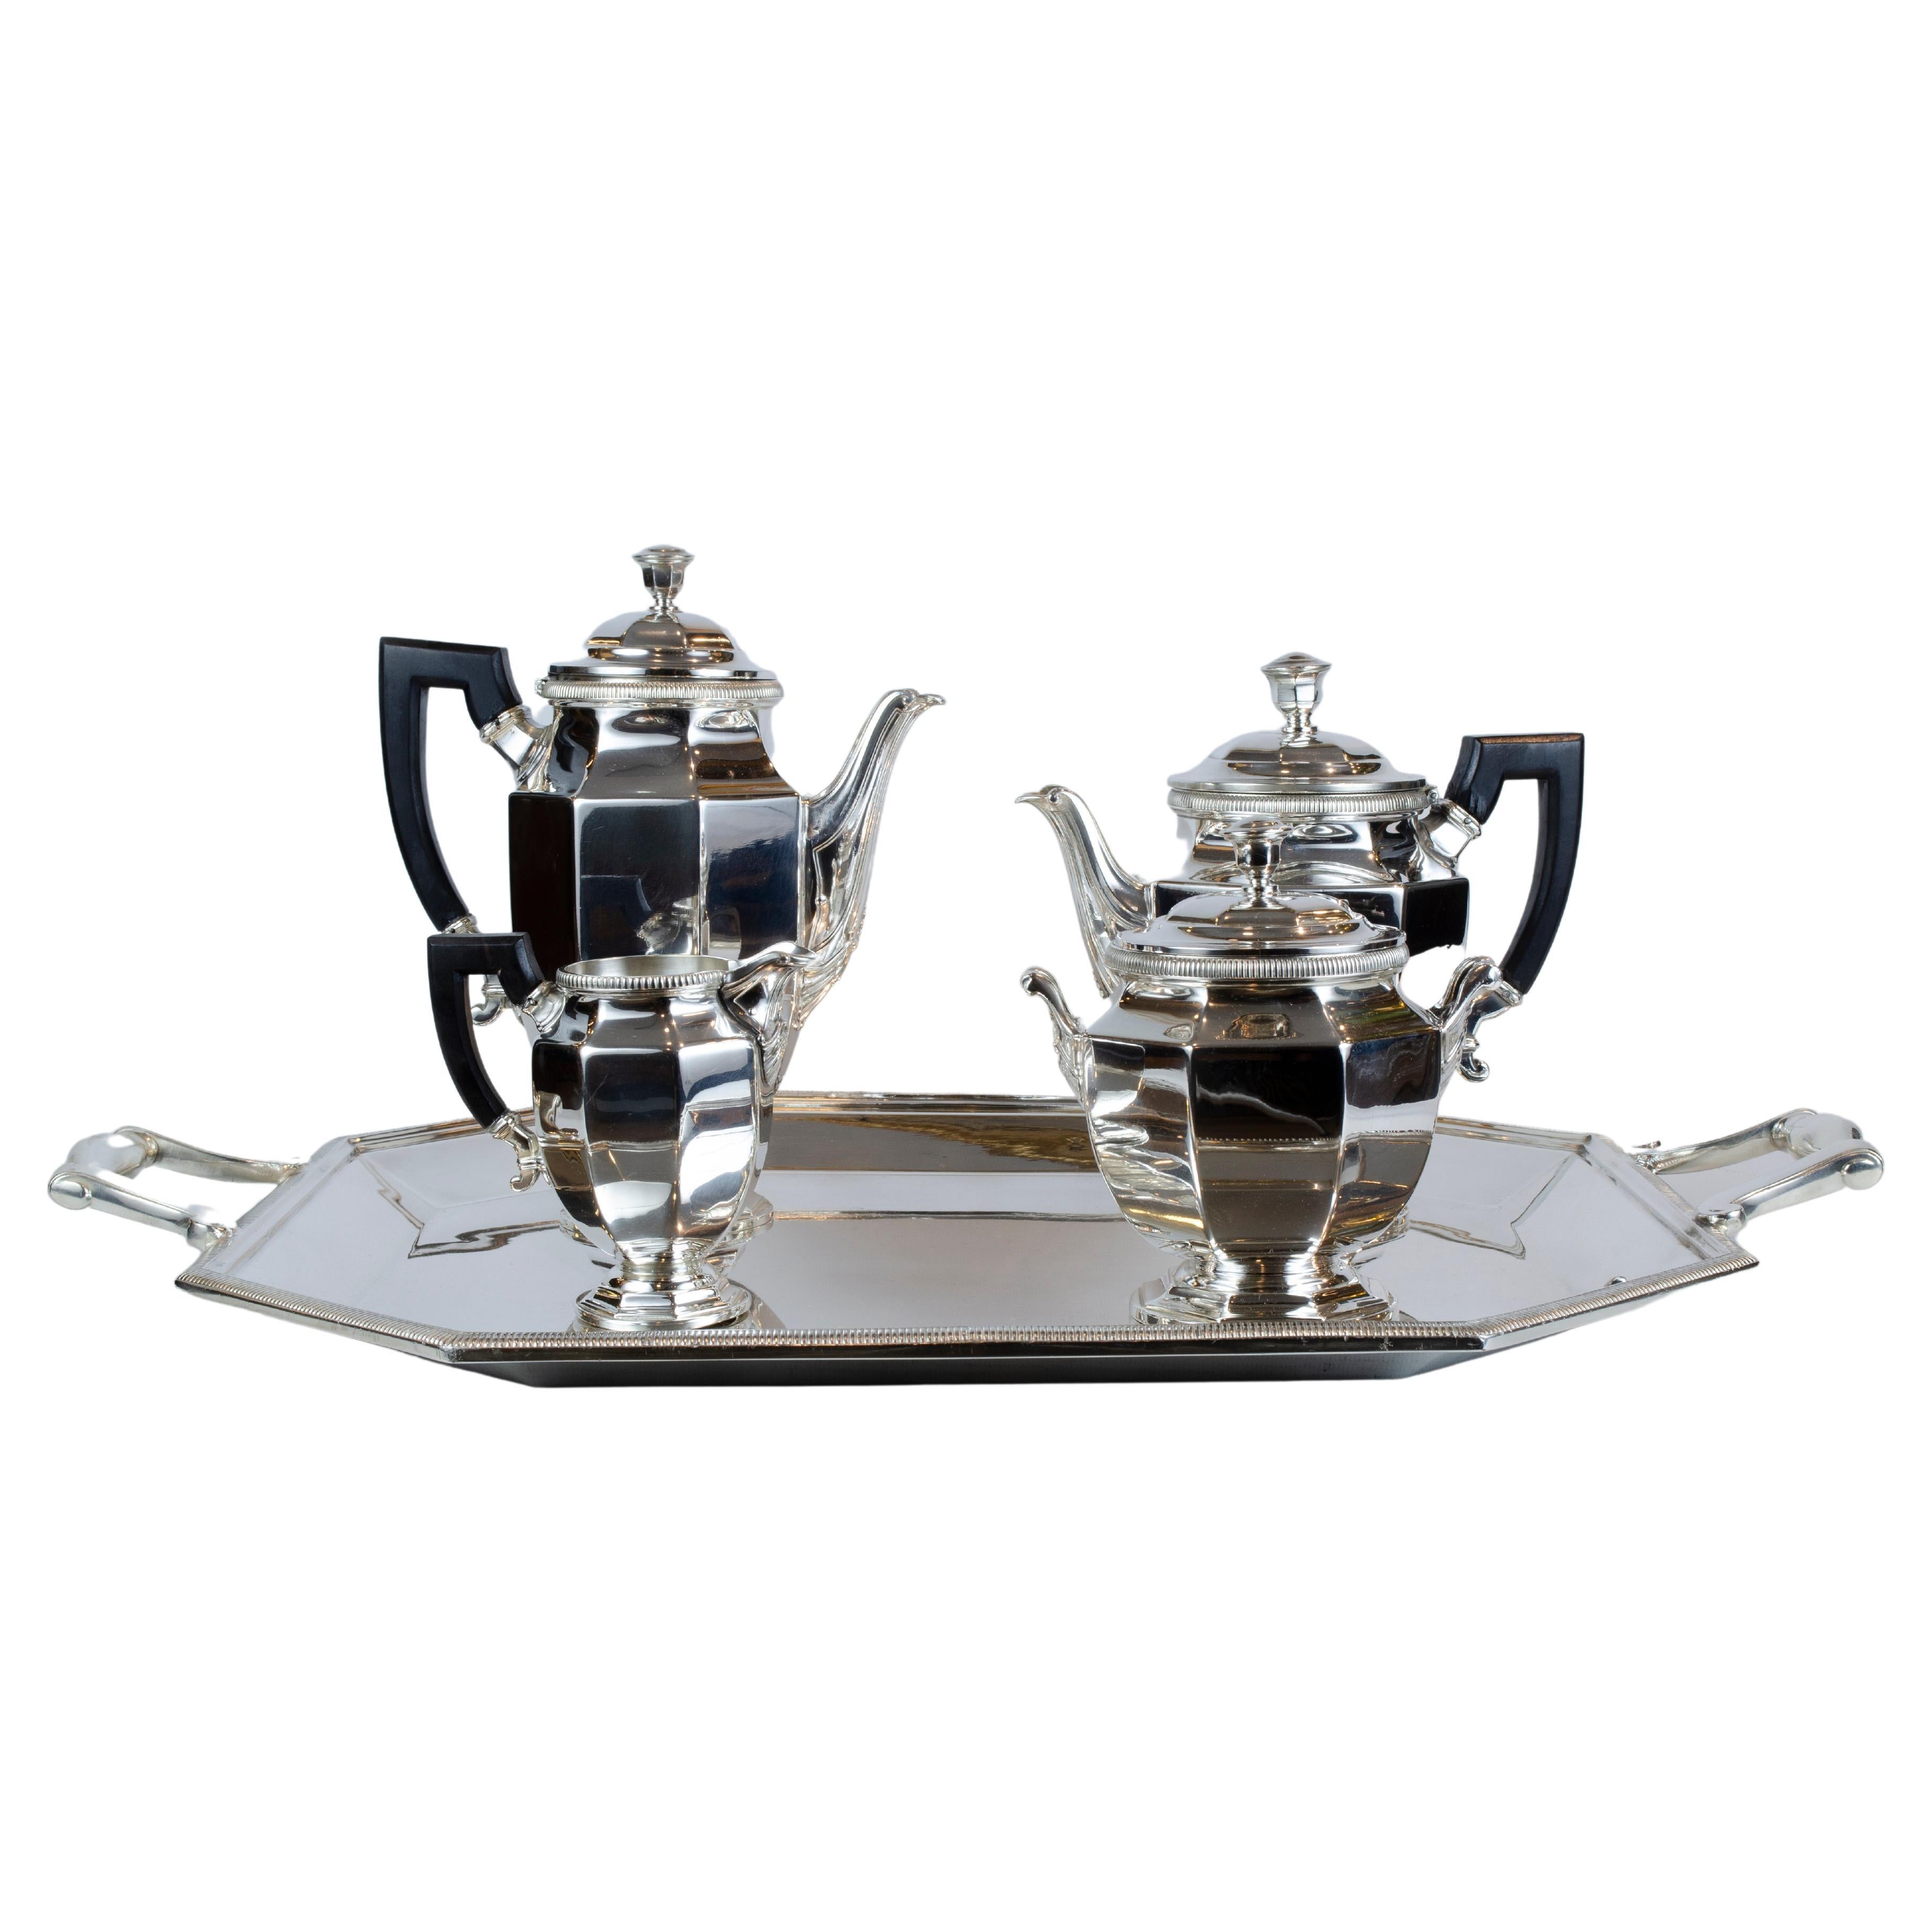 Gallia by Christofle Art Déco - Coffee and tea service - Silver plated
Superb Art Deco Gallia by Christofle tea and coffee set made of silvered metal with ebony handles. It includes: - a tray: 47 cm x 40. 5 cm - a coffee pot: 23. 5 cm - a sugar